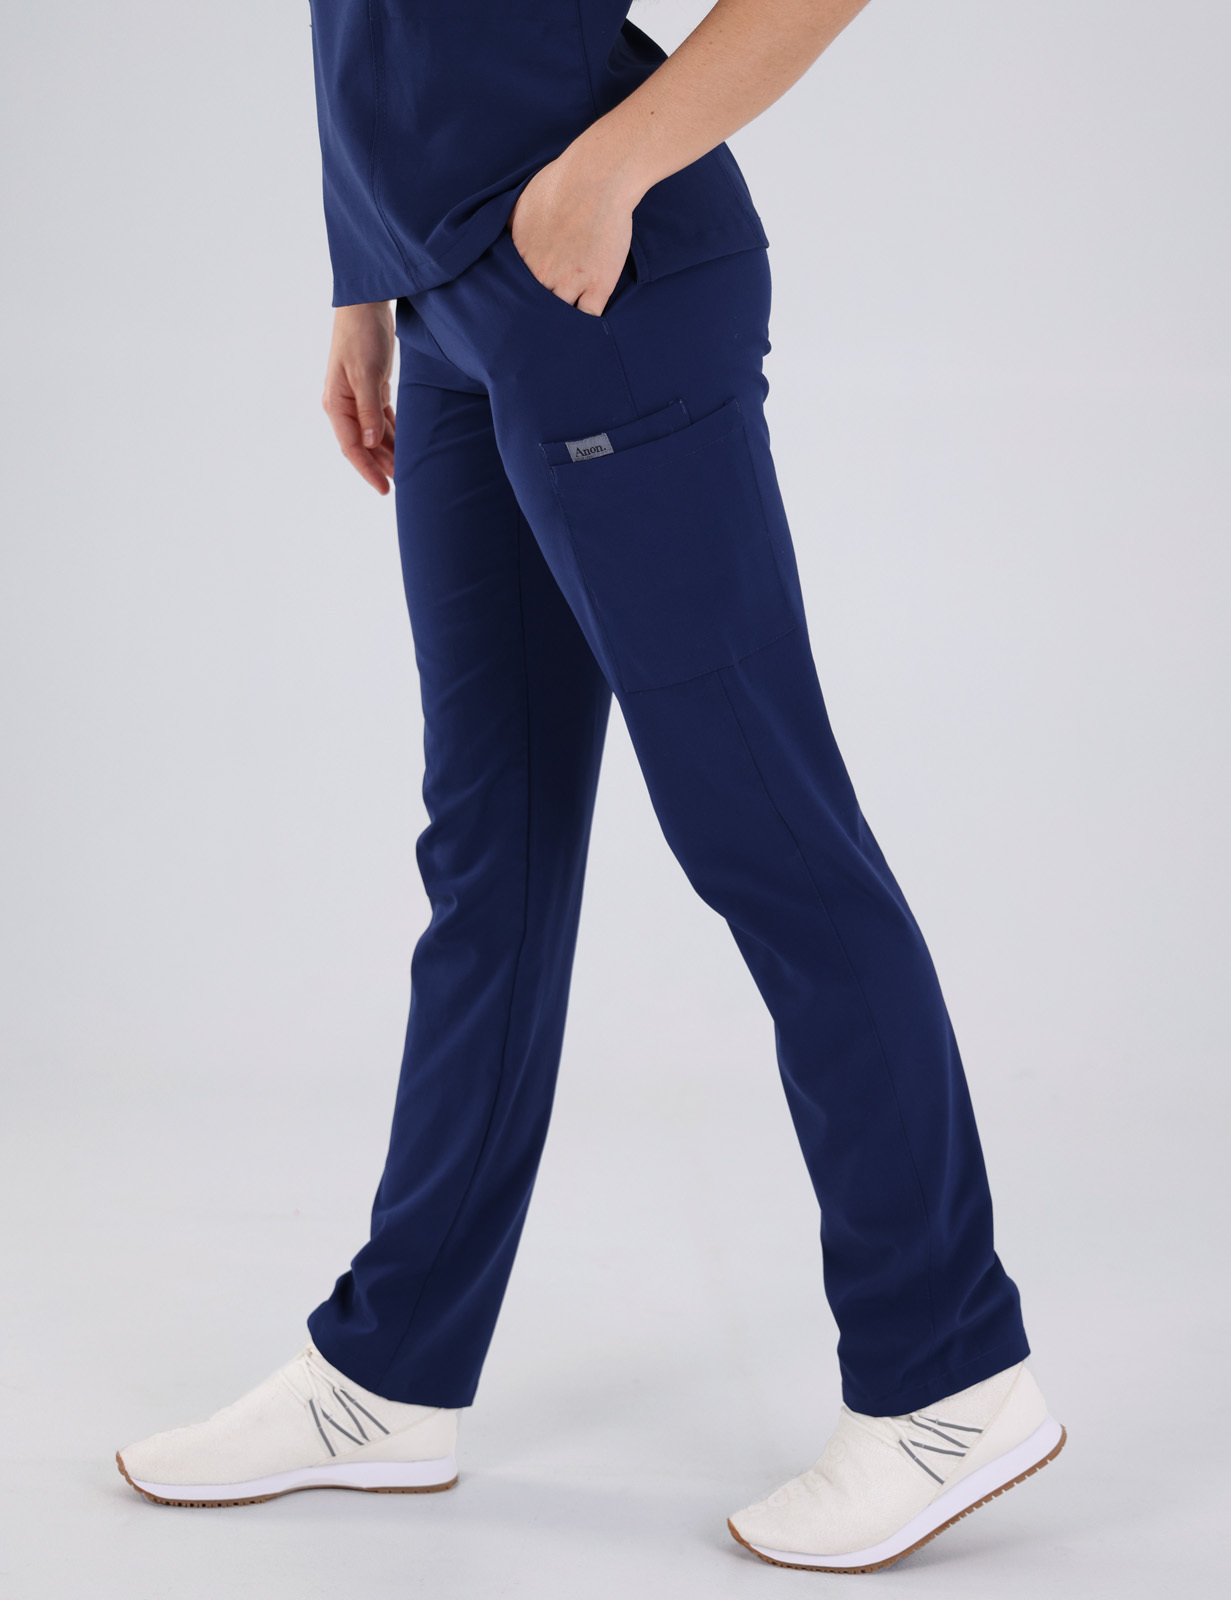 Anon Women's Scrub Pants (Whisper Collection) Poly/Spandex - Midnight Blue 